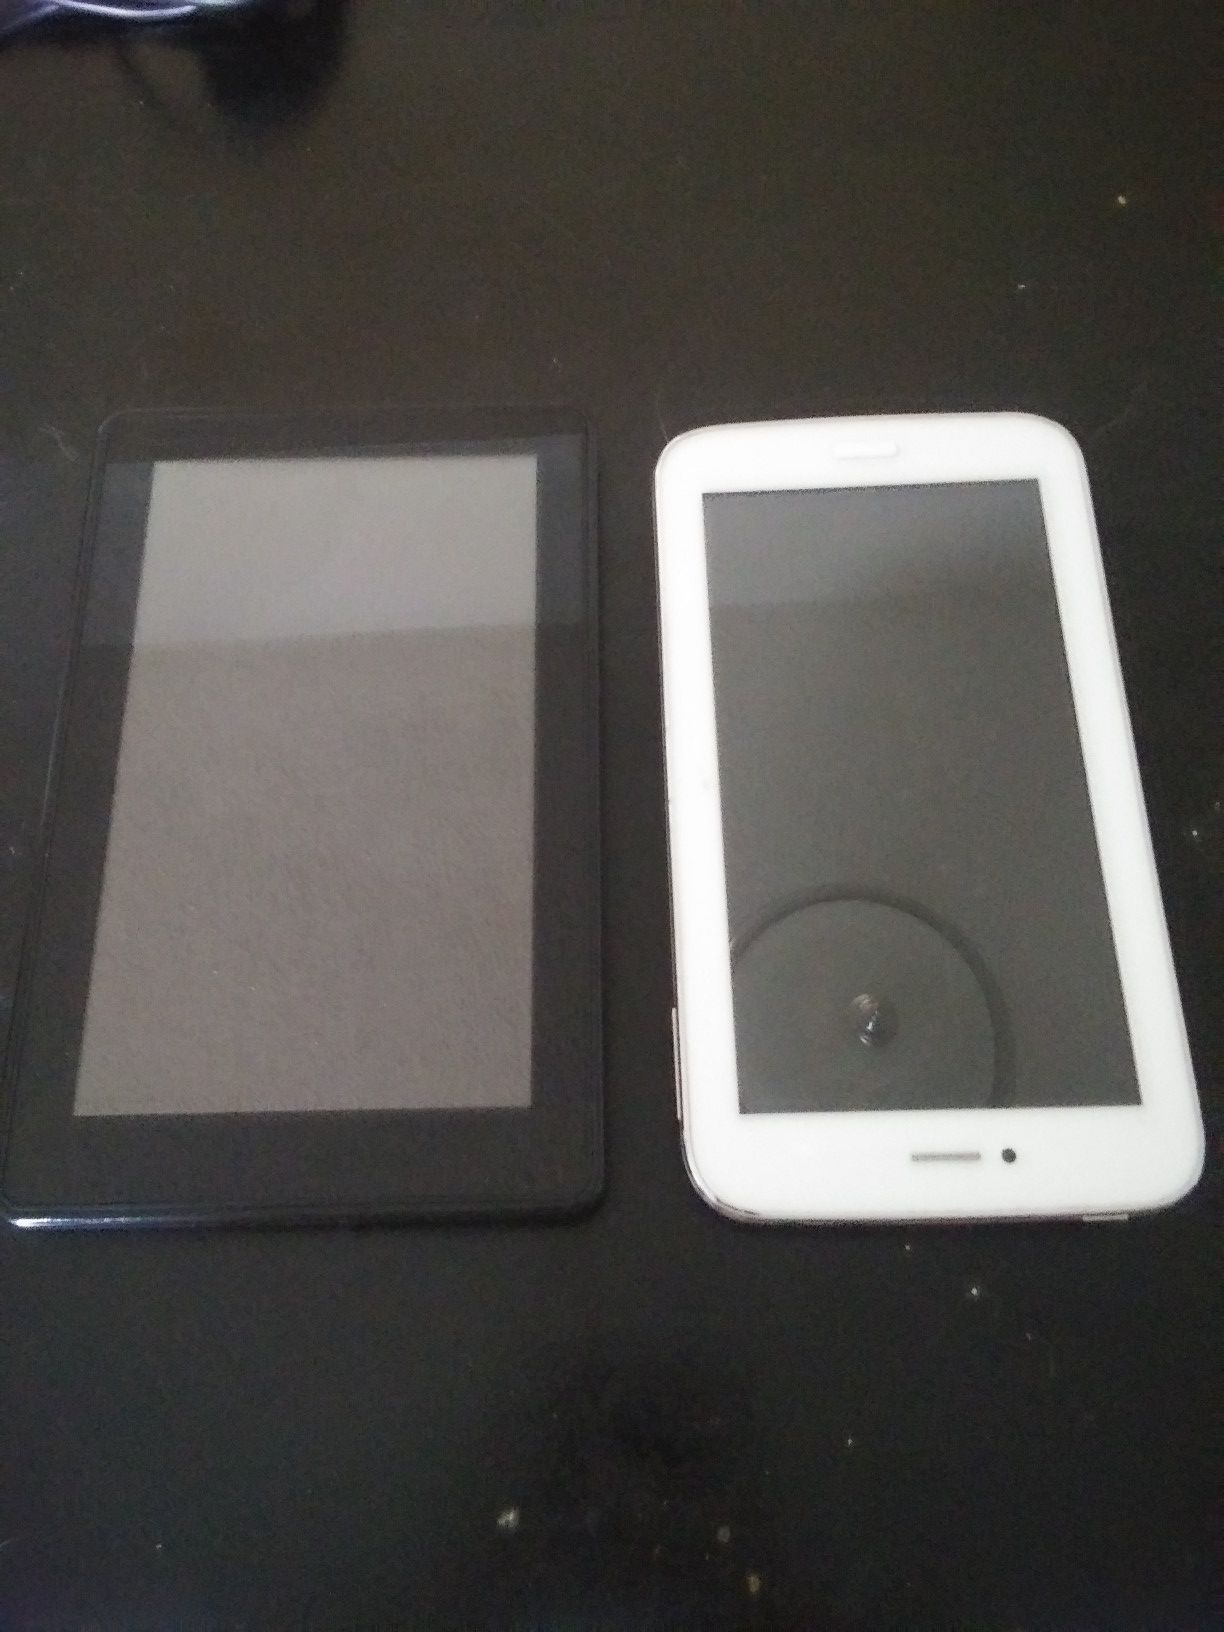 Amazon Kindle & android tablets